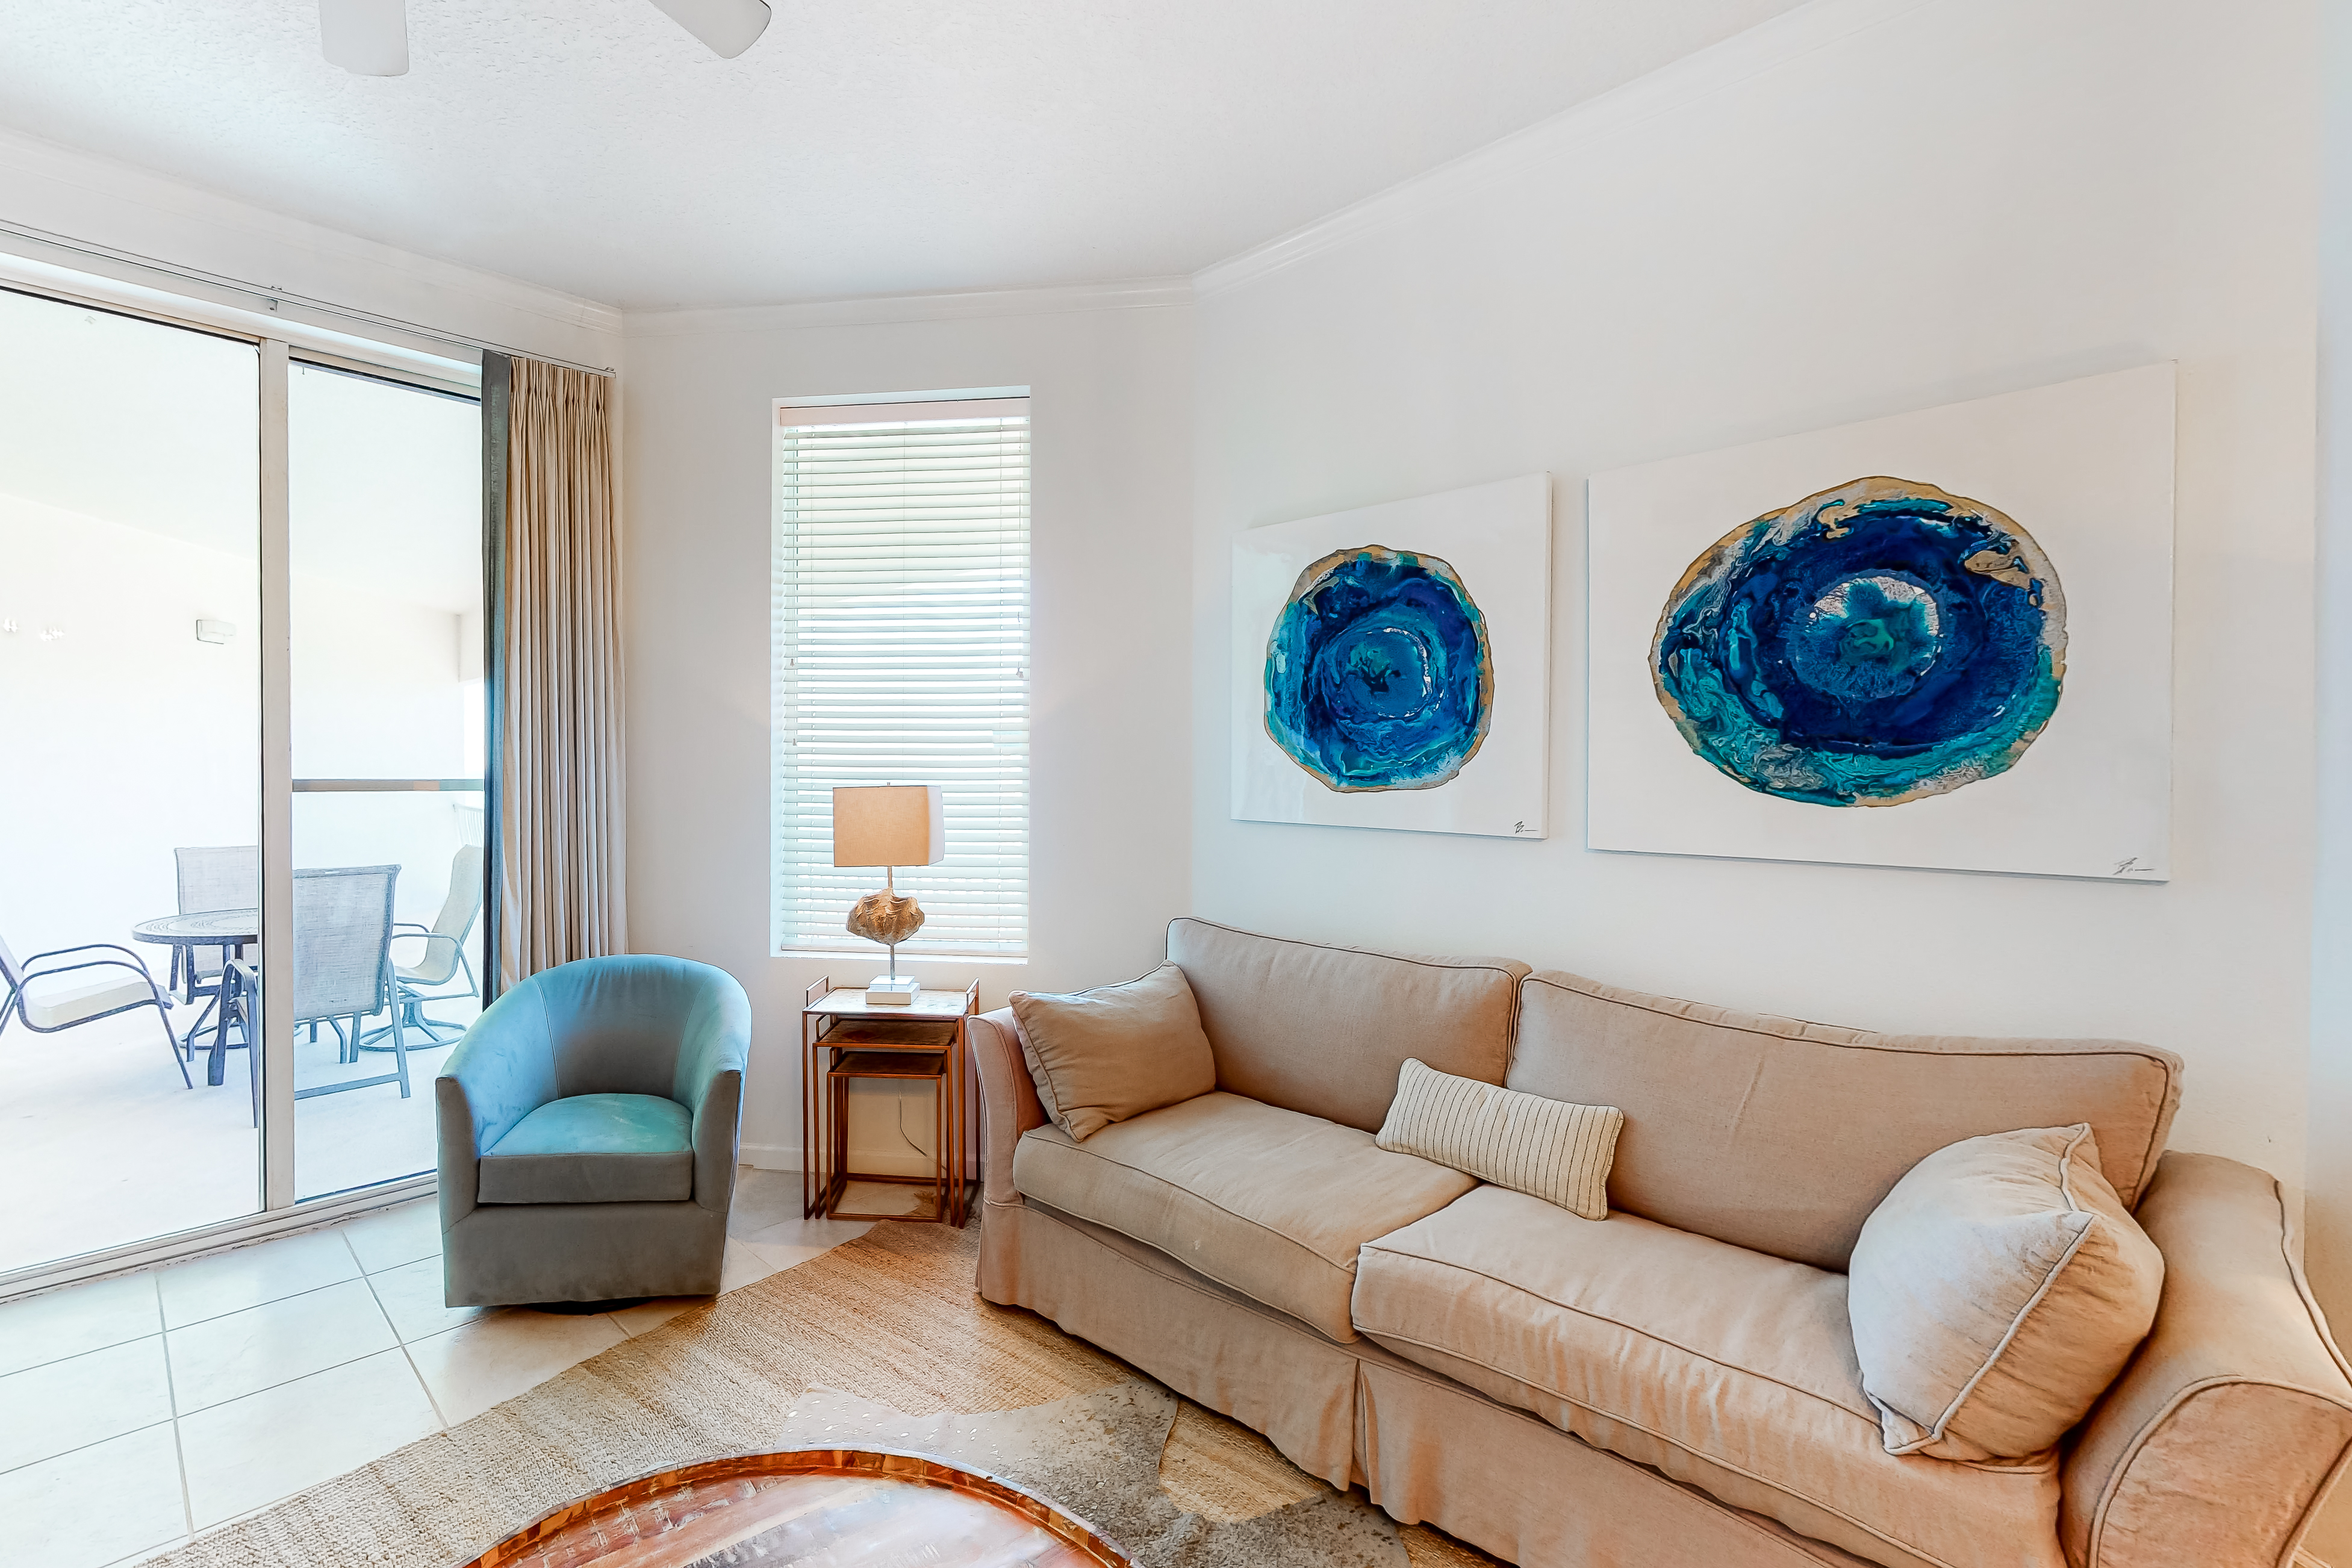 Dunes of Seagrove A404 Condo rental in Dunes of Seagrove in Highway 30-A Florida - #2